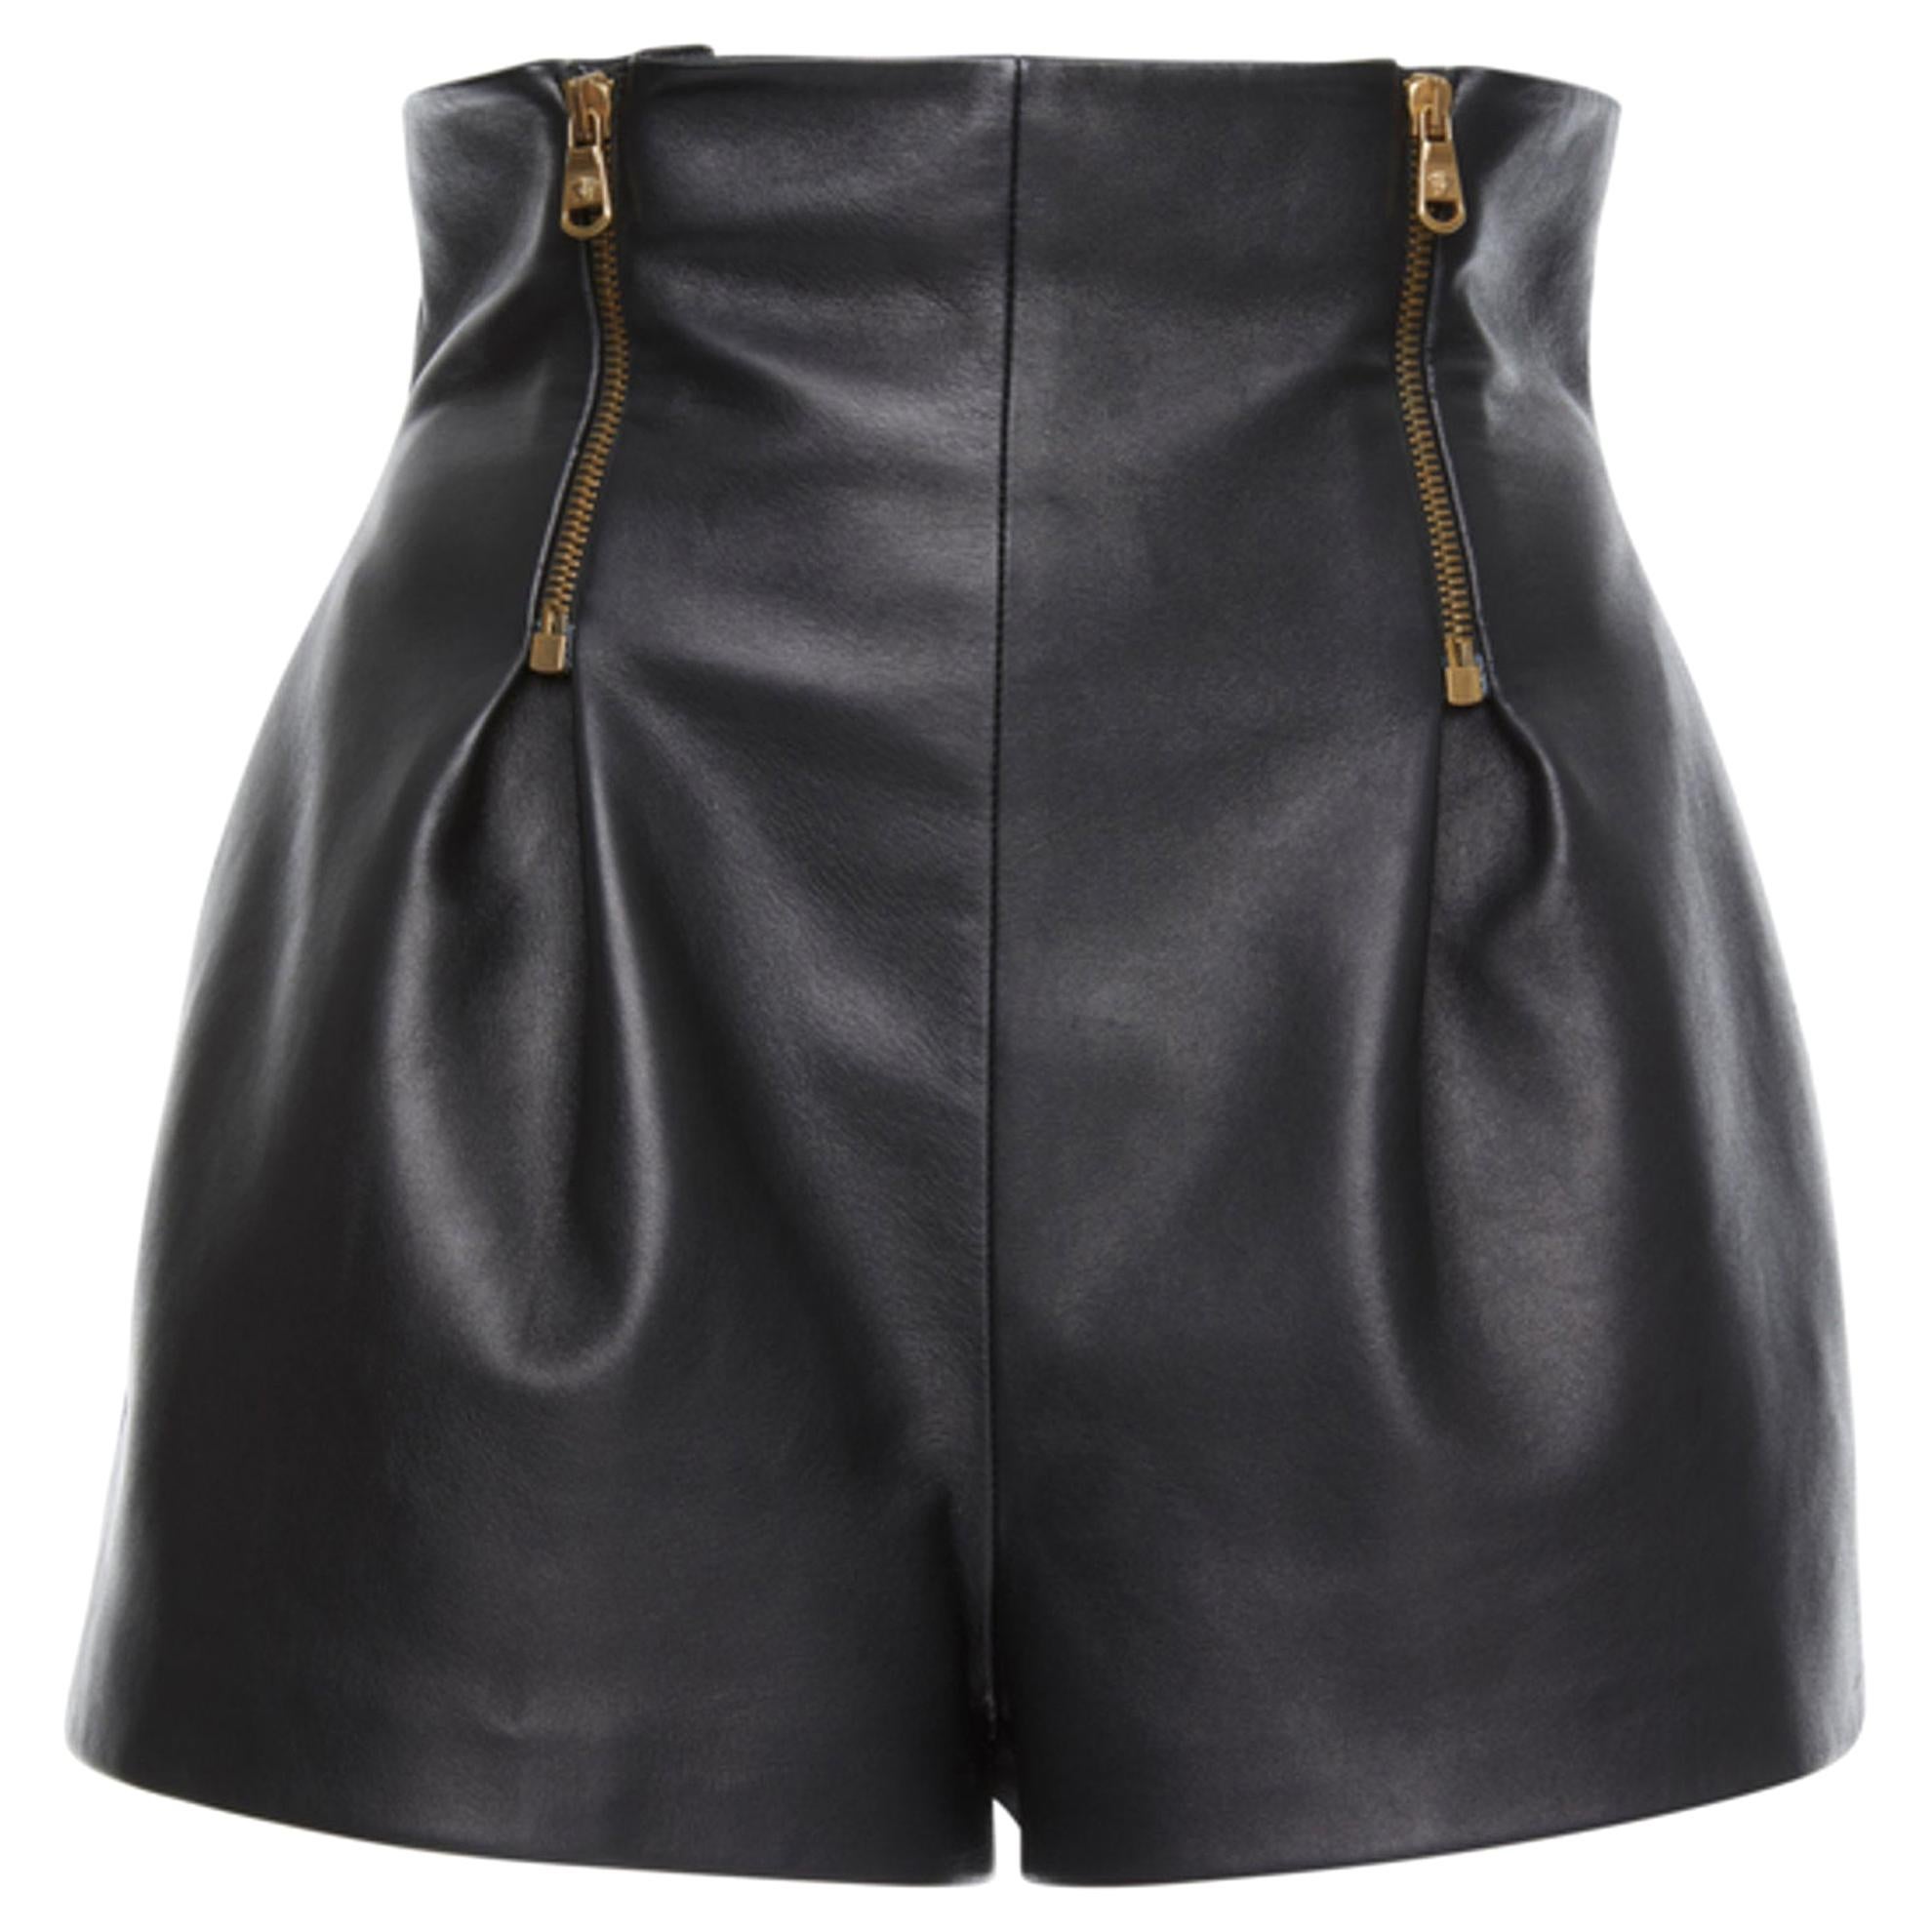 Versace SS19 Black High Waisted Leather Shorts with Gold Tone